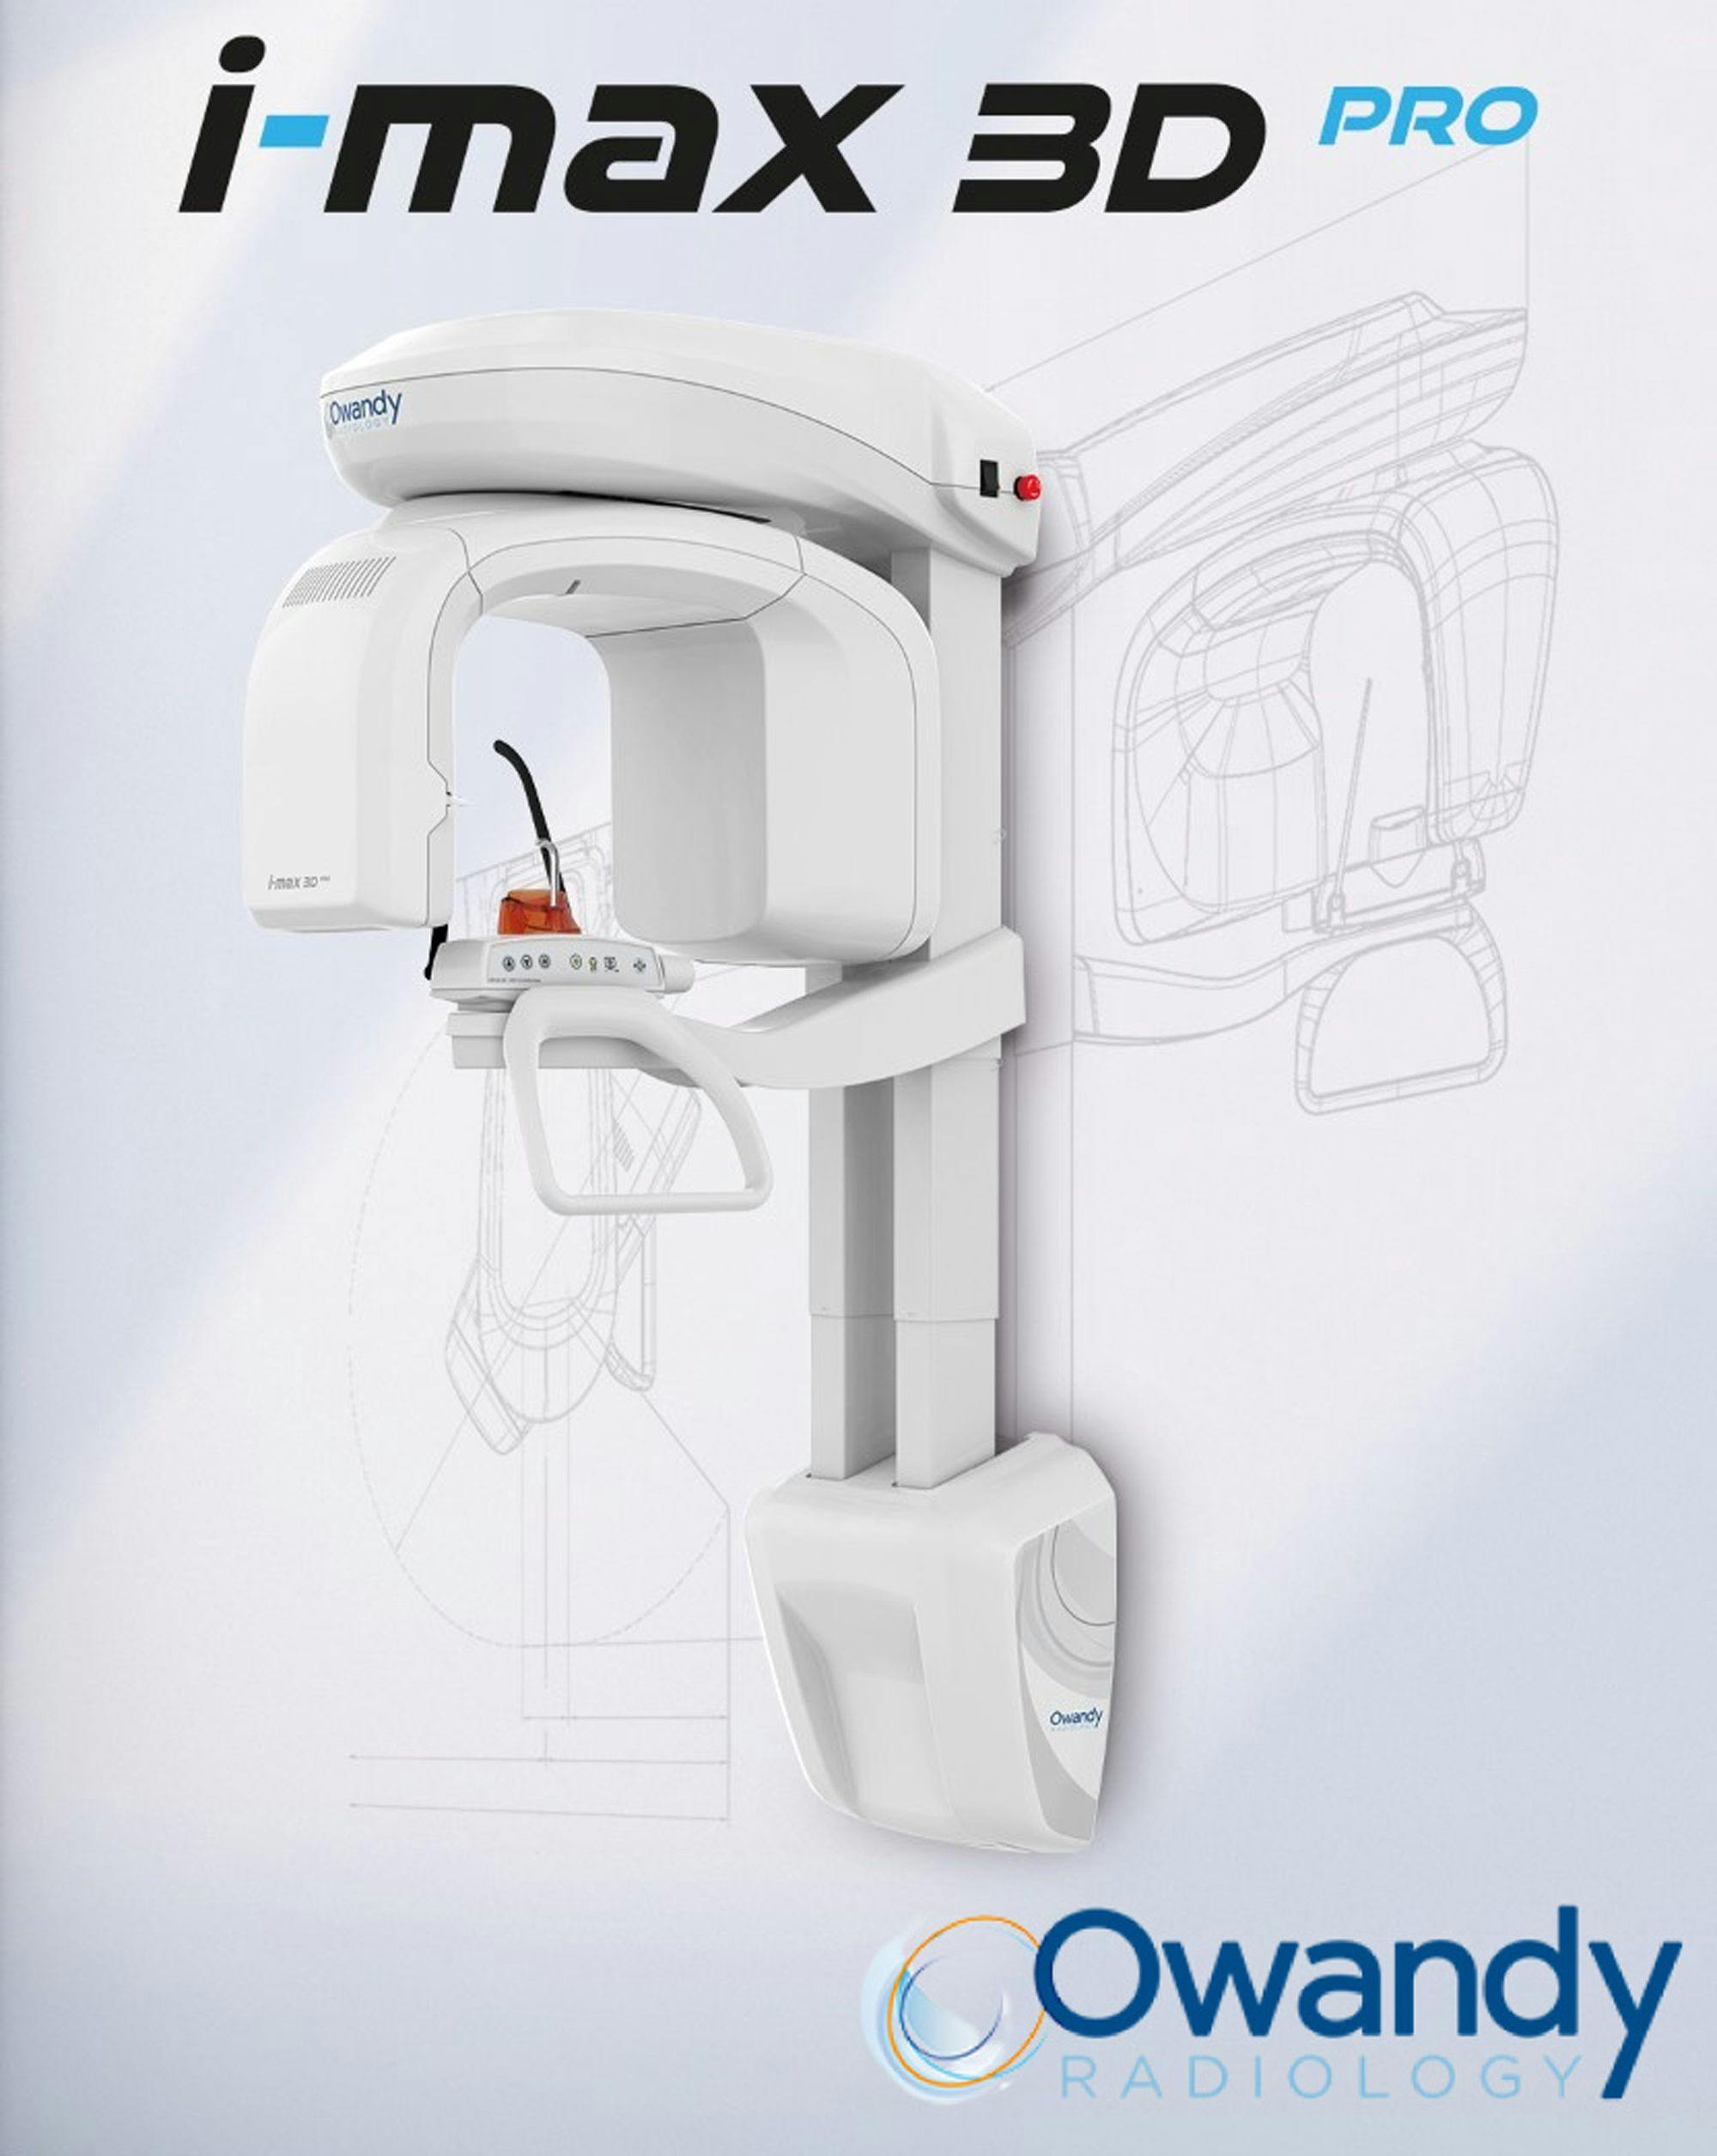 Owandy to Unveil I-Max 3D Pro CBCT Unit at CDA Meeting. Image: © Owandy Radiology. 